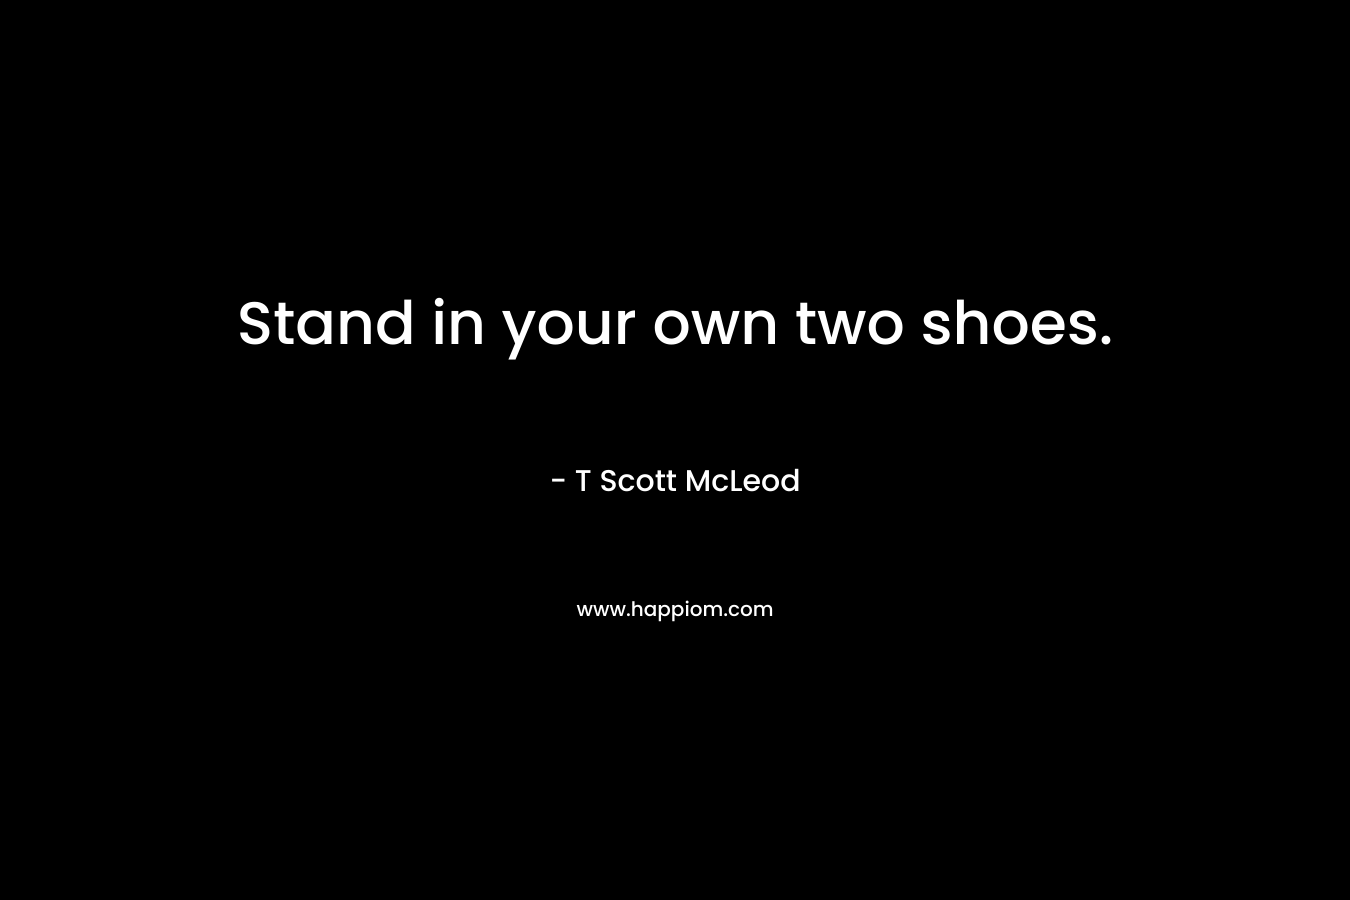 Stand in your own two shoes.